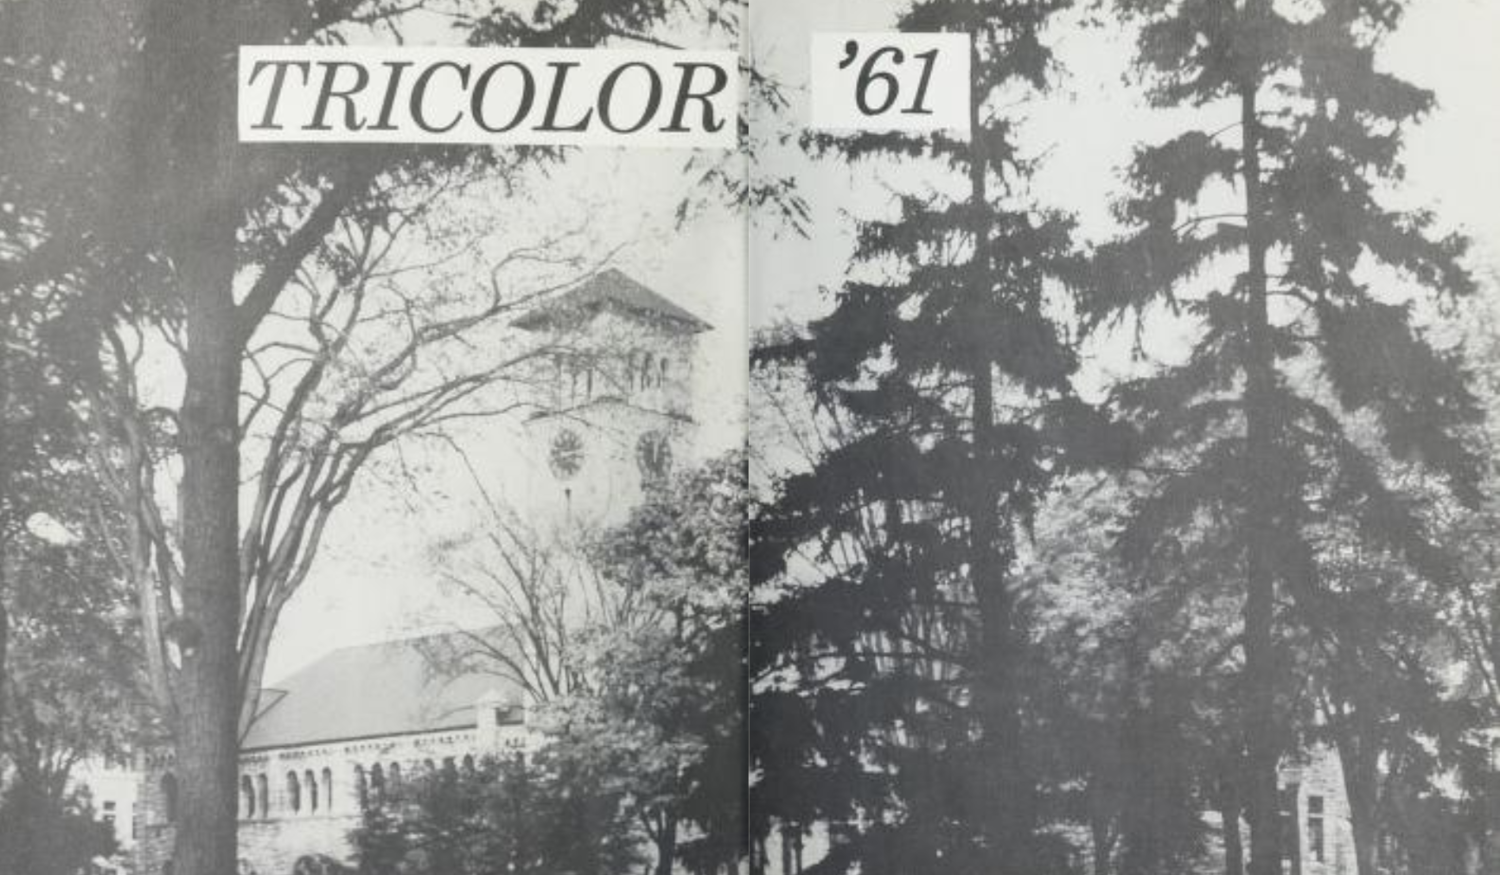 Scan of the Tricolor Yearbook, 1961. A two page spread features the tower of Grant Hall, with text that reads "Tricolor '61."